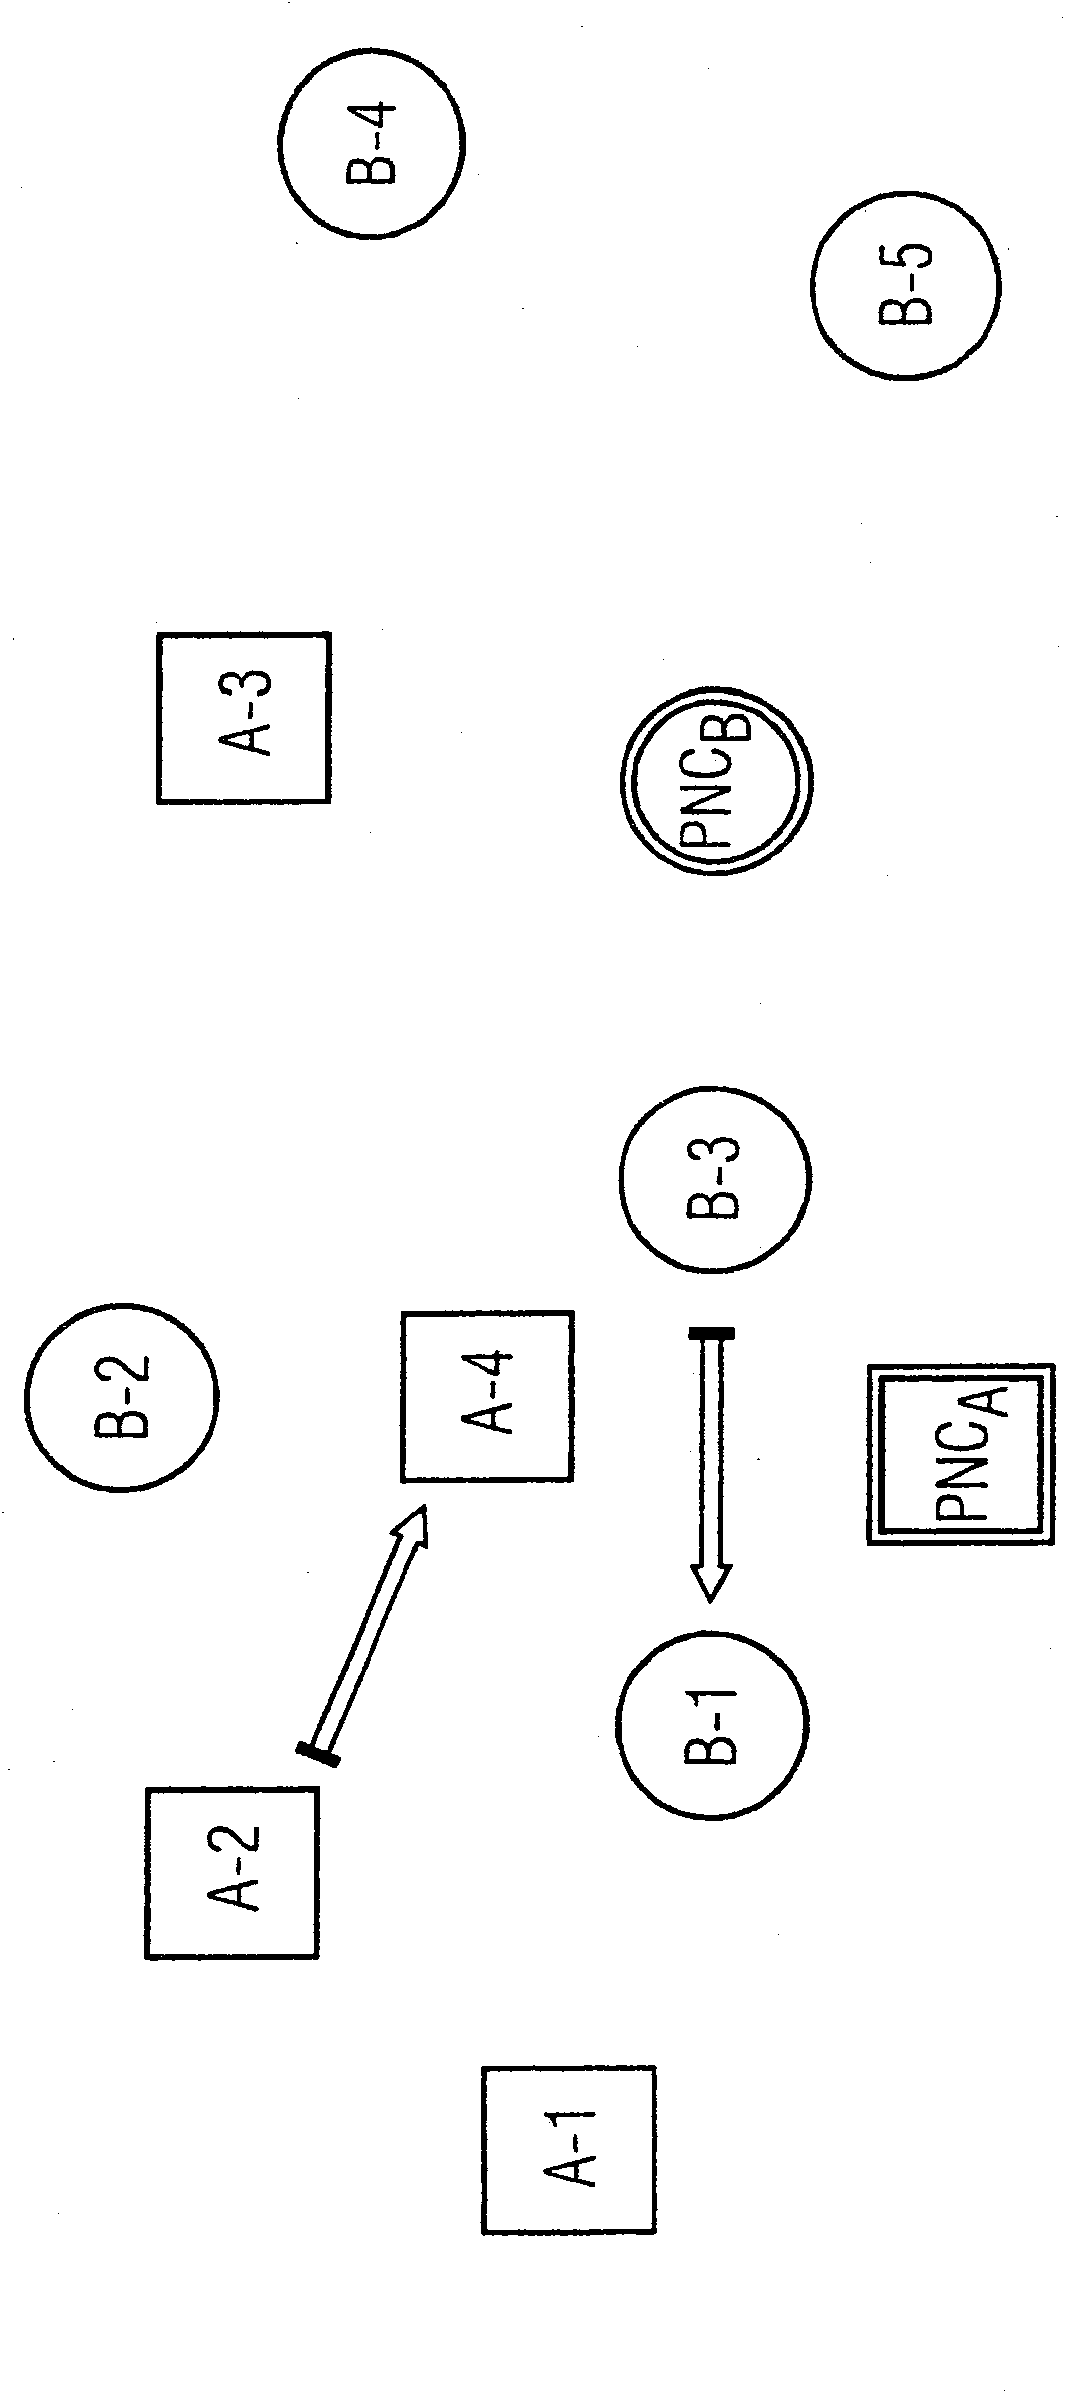 Preamble generator for a multiband OFDM transceiver